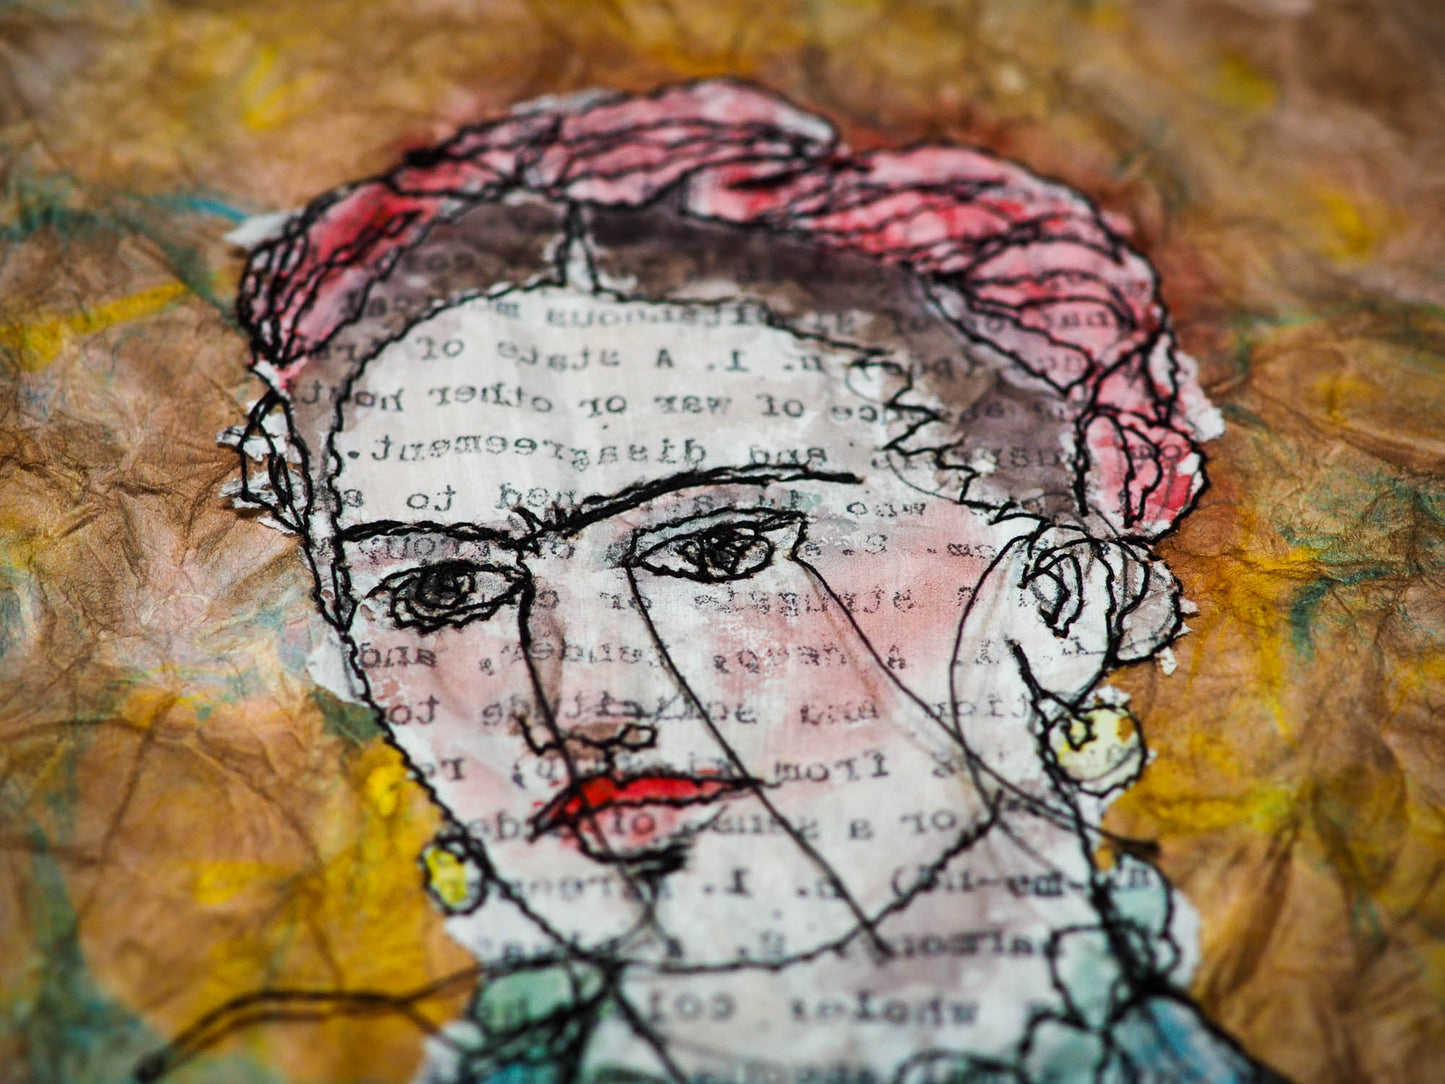 Freehand embroidery painting by Danita Art. Sewing using free motion stitching and embroidery, Danita created a beautiful textile and fabric art original artwork with famous Mexican artist Frida Kahlo featured in a one of a kind portrait.